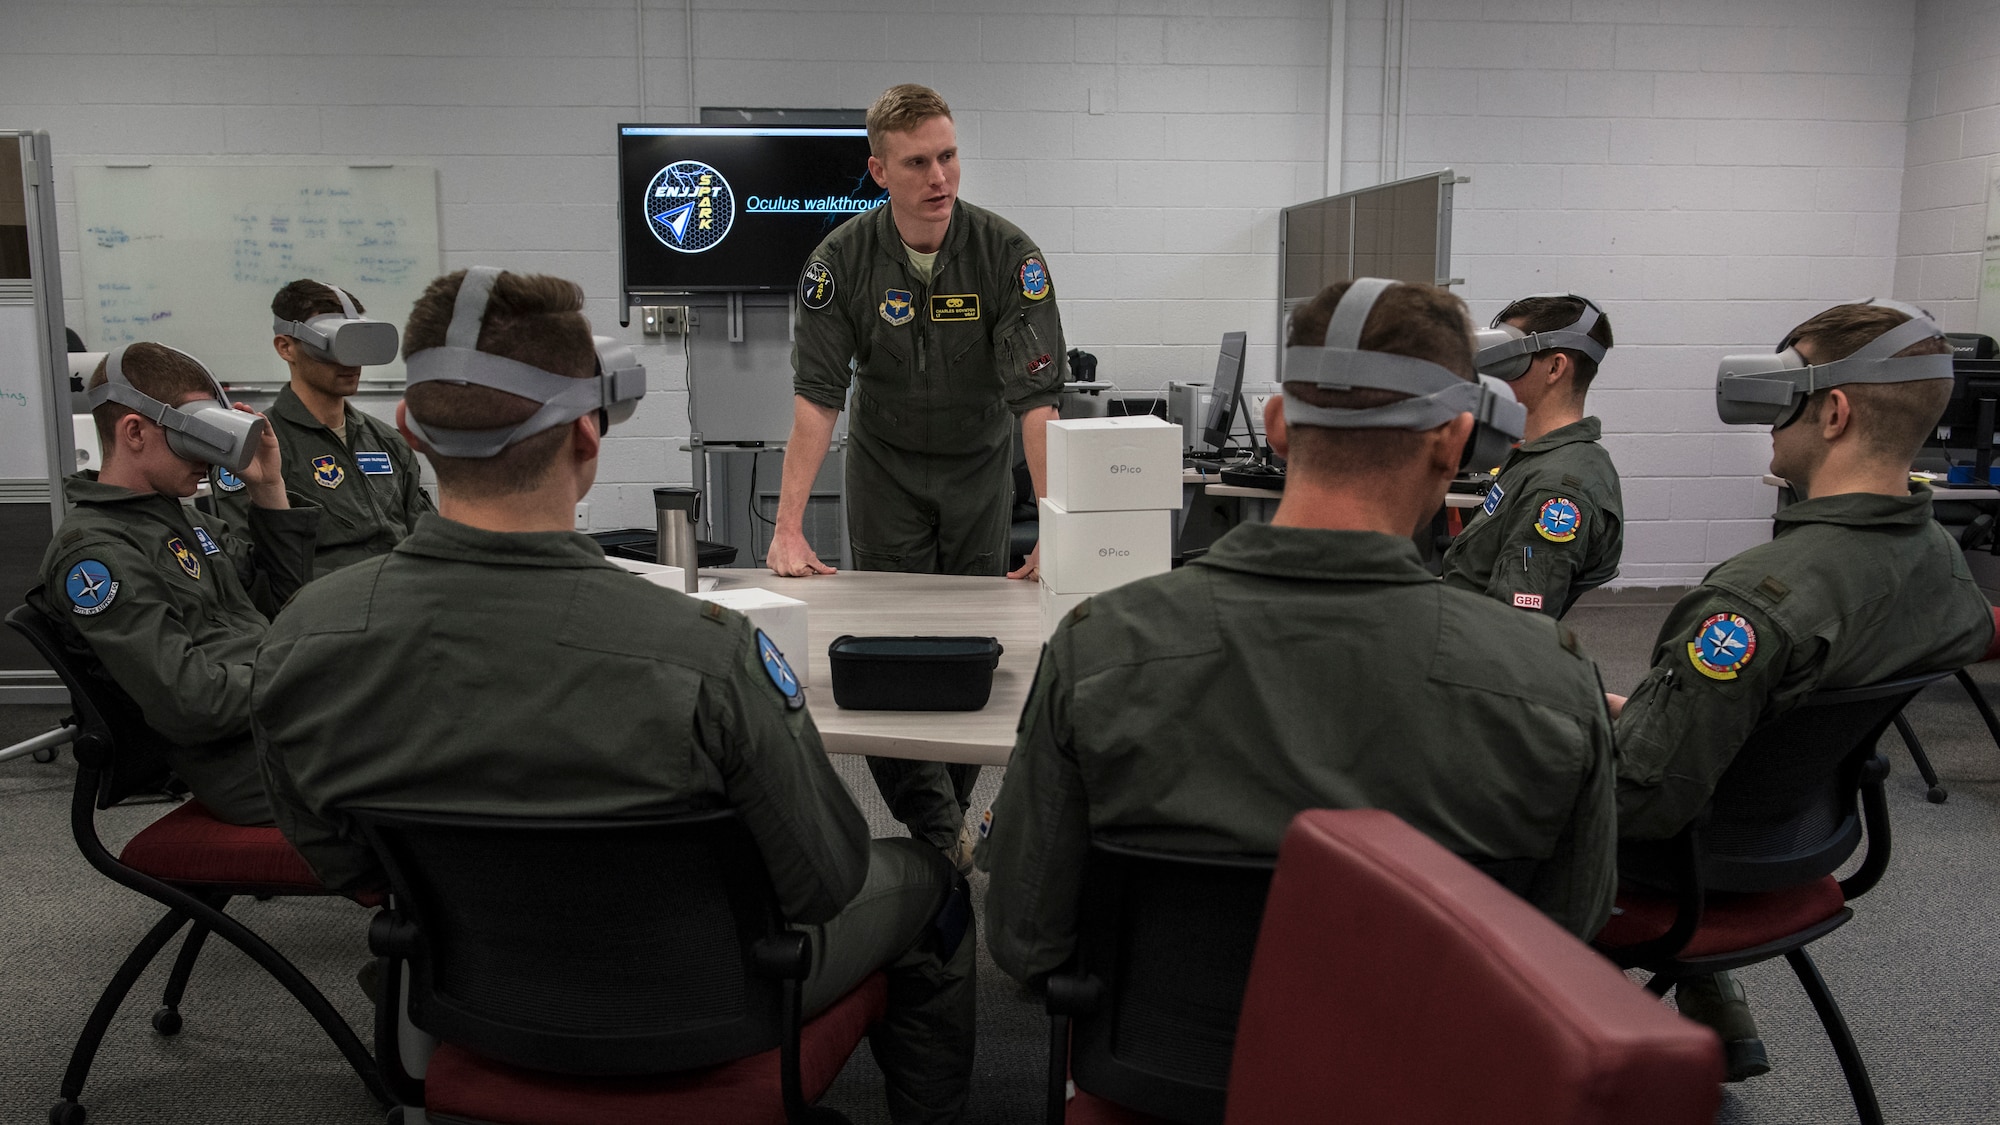 Euro-NATO Joint Jet Pilot Training Program student pilots use virtual reality headsets at Sheppard Air Force Base, Texas, Dec. 10, 2019. The ENJJPT program allows student pilots access to the Spark Cell at Sheppard. The Spark Cell incorporates virtual and augmented reality into the student pilots training. They are allowed to check out headsets or schedule time to use the stations to continue their training without having to get into an actual plane. (U.S. Air Force photo by Senior Airman Pedro Tenorio)